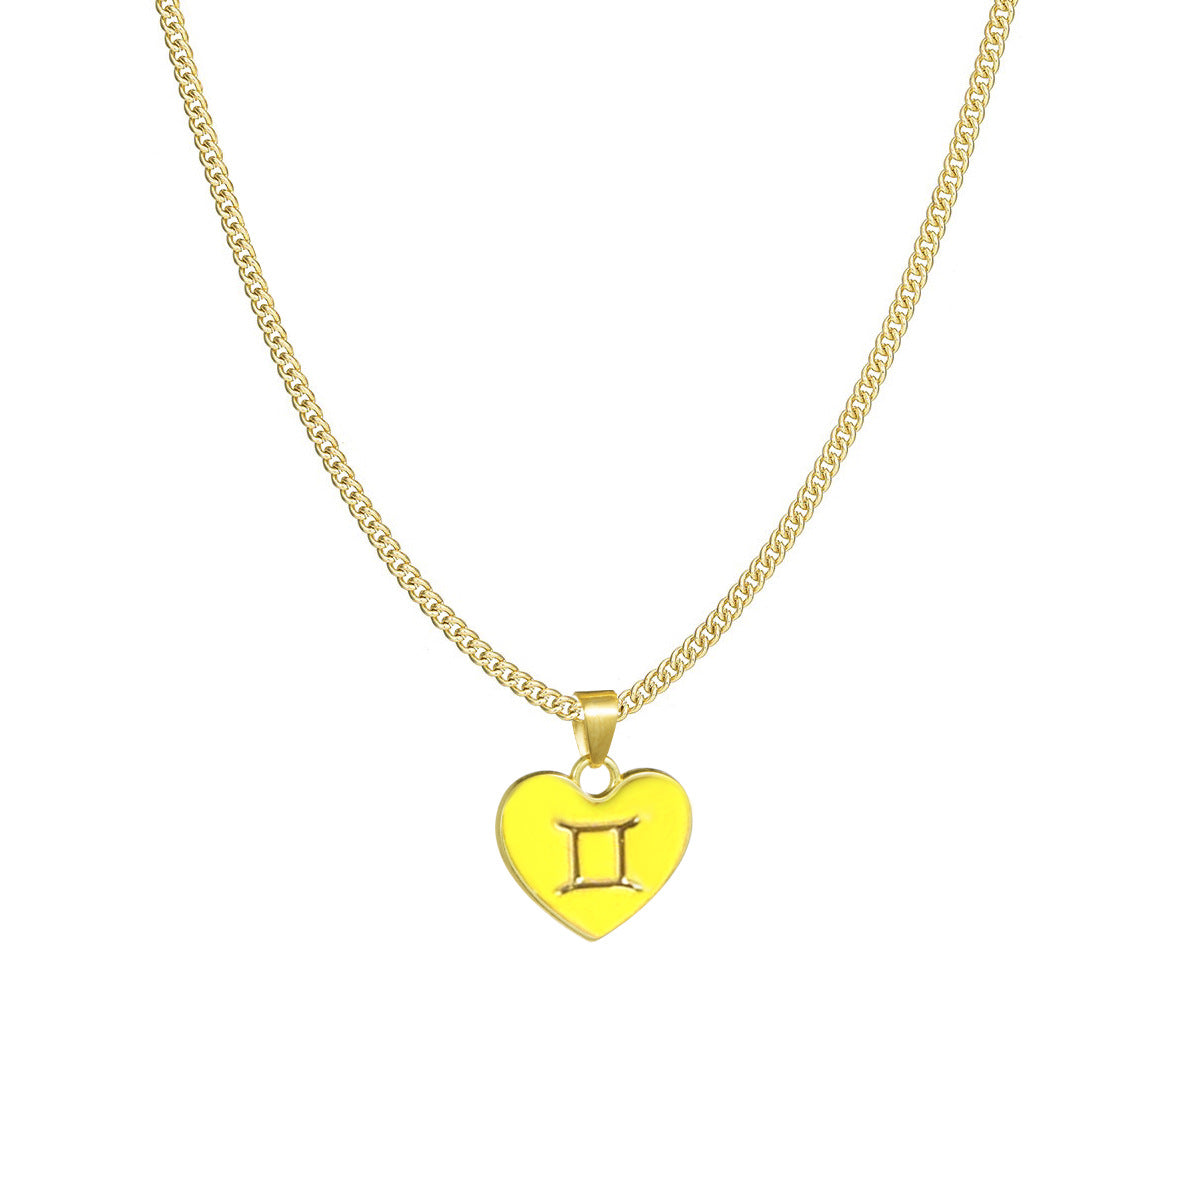 Lovemi -  12 Constellation Love Necklace Ins Personalized Heart-shaped Necklace Clavicle Chain Fashion Jewelry For Women Valentine's Day